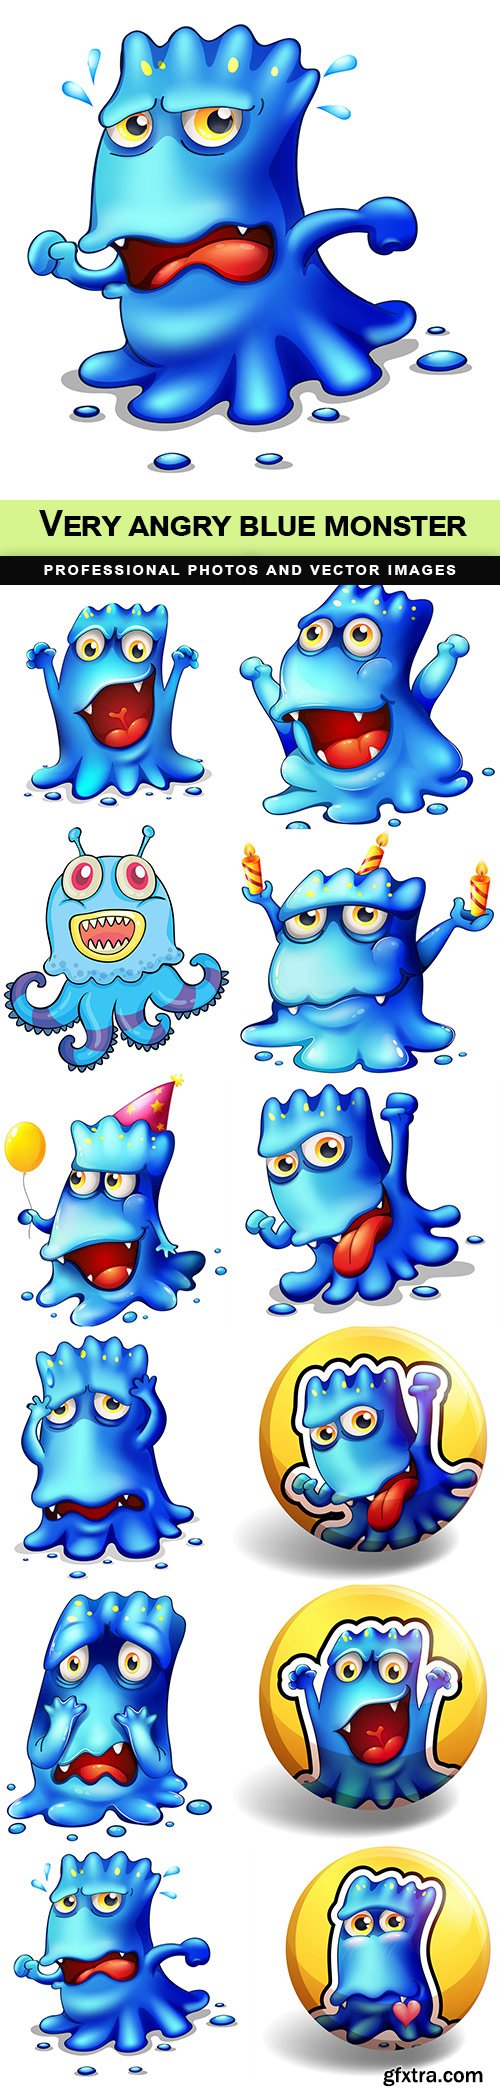 Very angry blue monster - 12 EPS